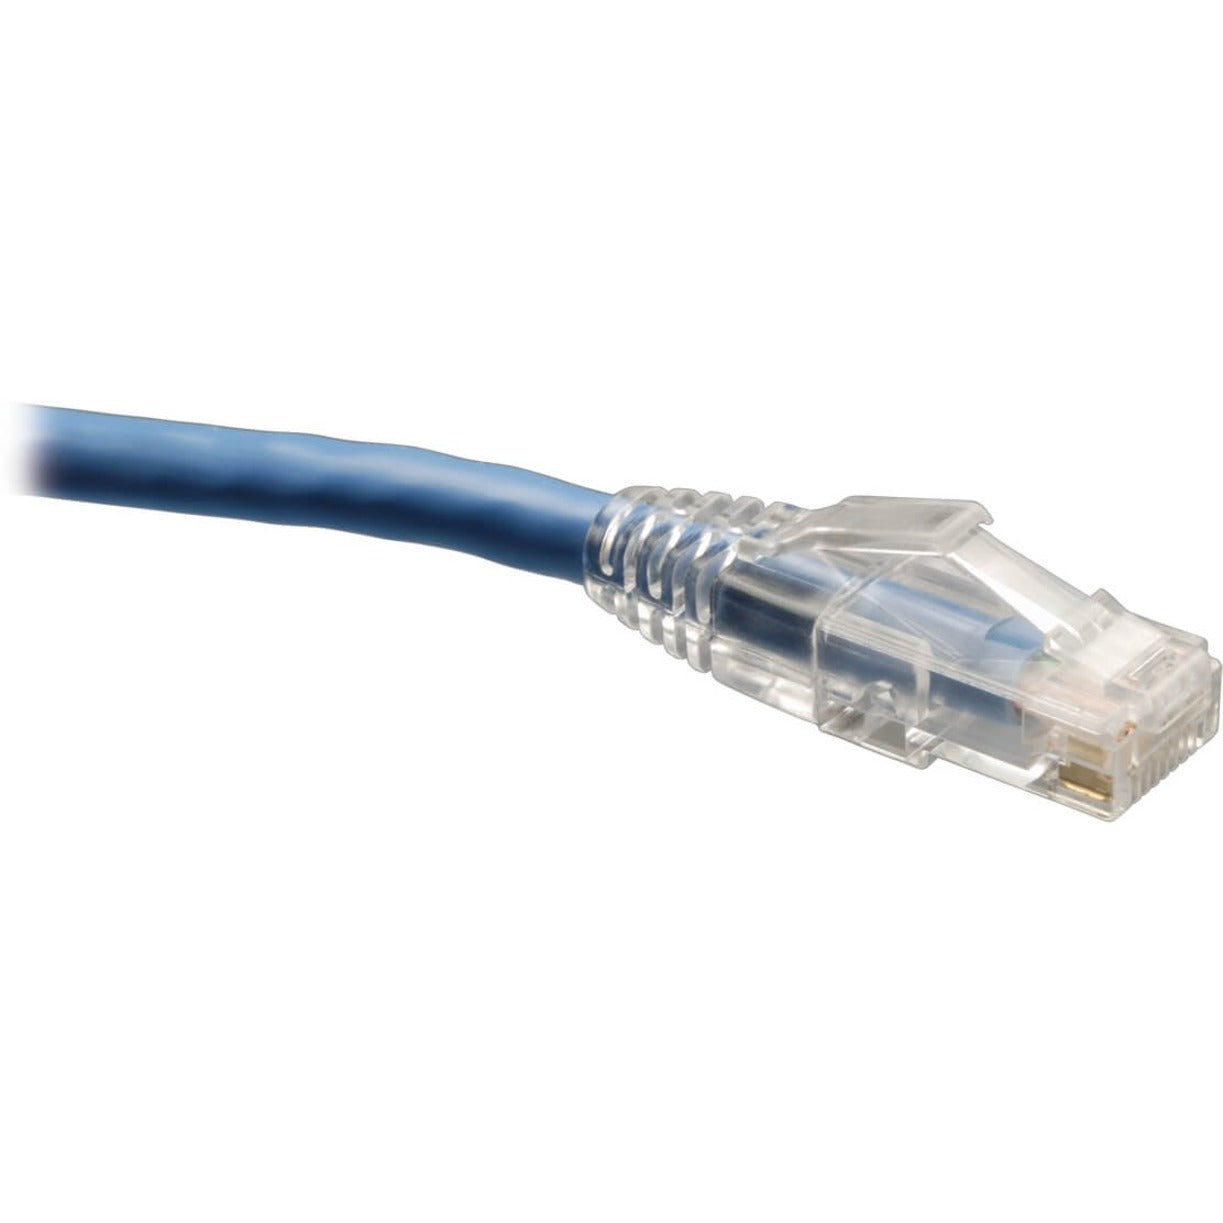 Tripp Lite by Eaton N202-125-BL Cat6 Gigabit Solid Conductor Snagless Patch Cable, 125-ft., Blue